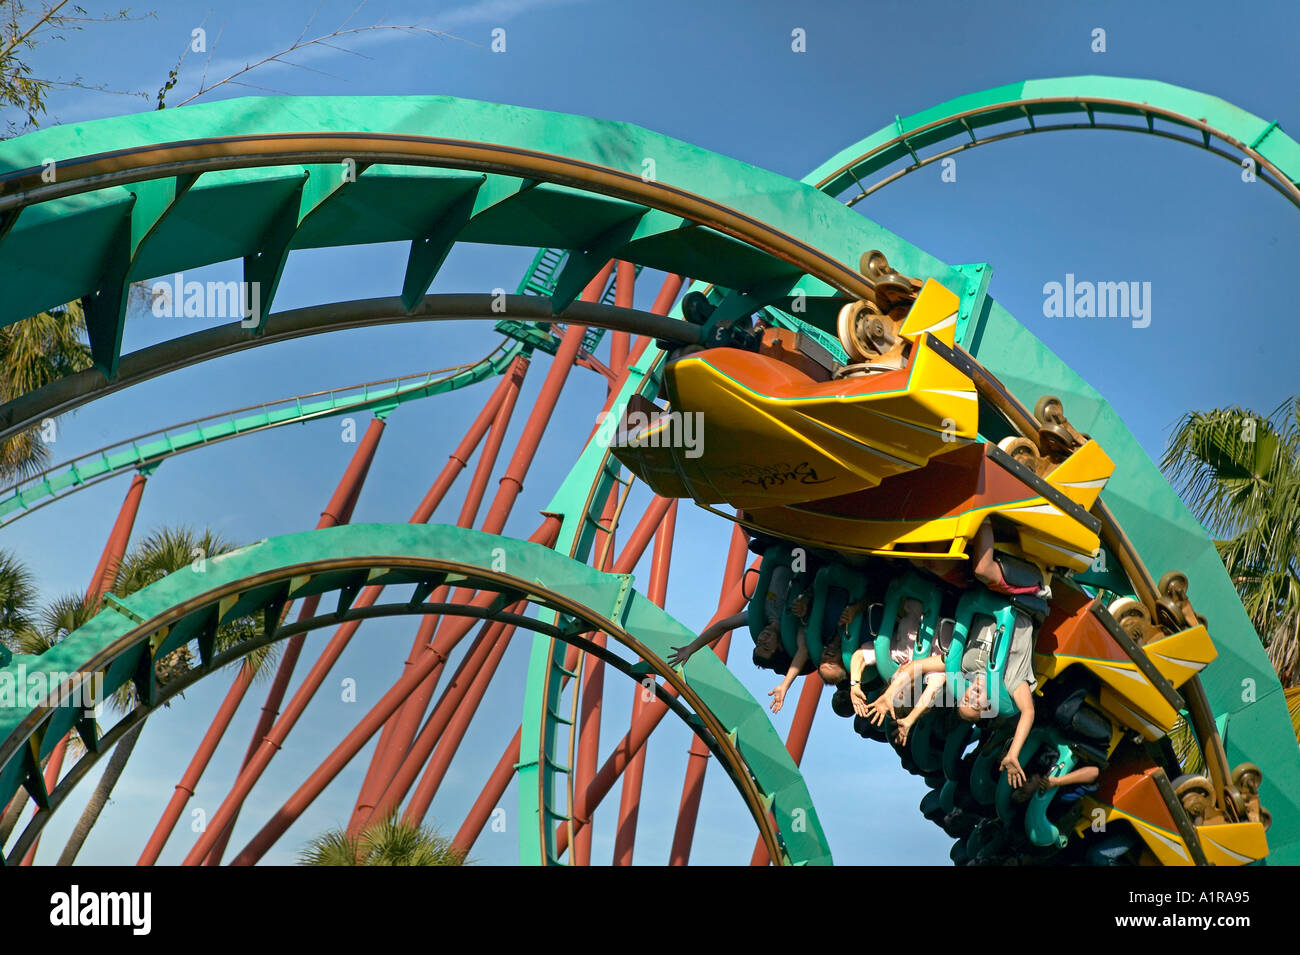 Riders Loop Up Side Down On Kumba Roiller Coaster Busch Gardens